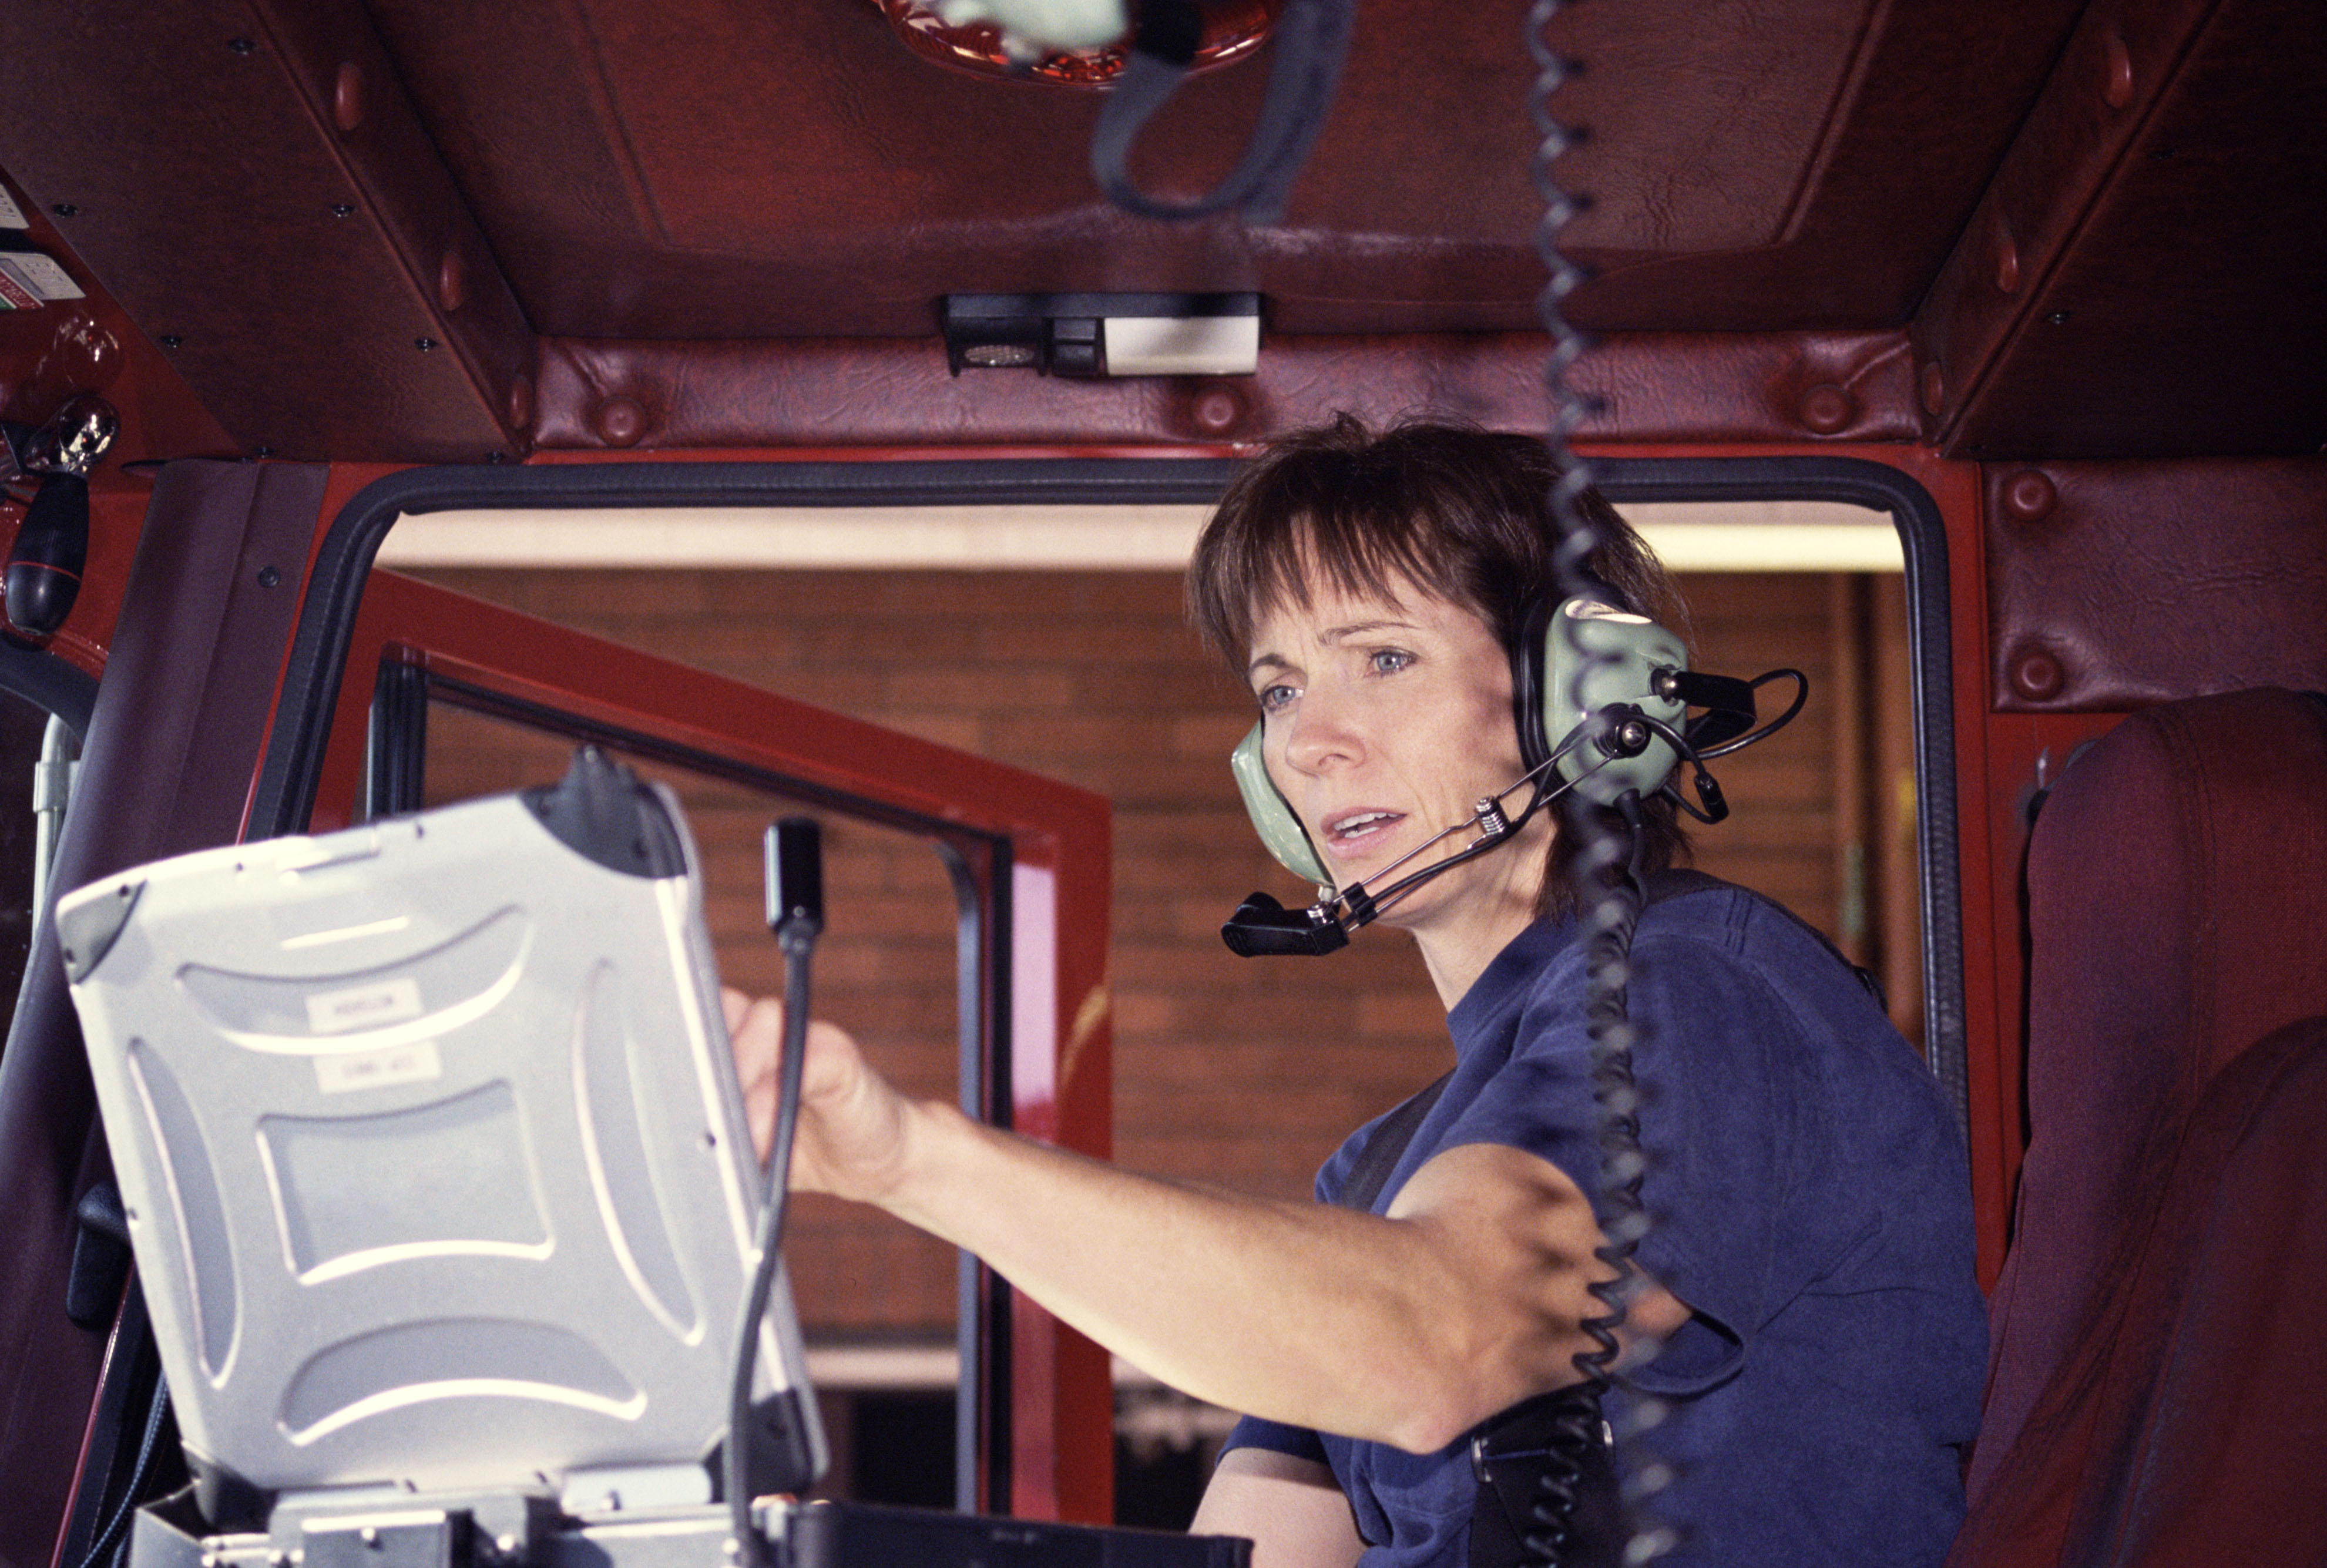 A 911 dispatcher answers a call | Source: Getty Images